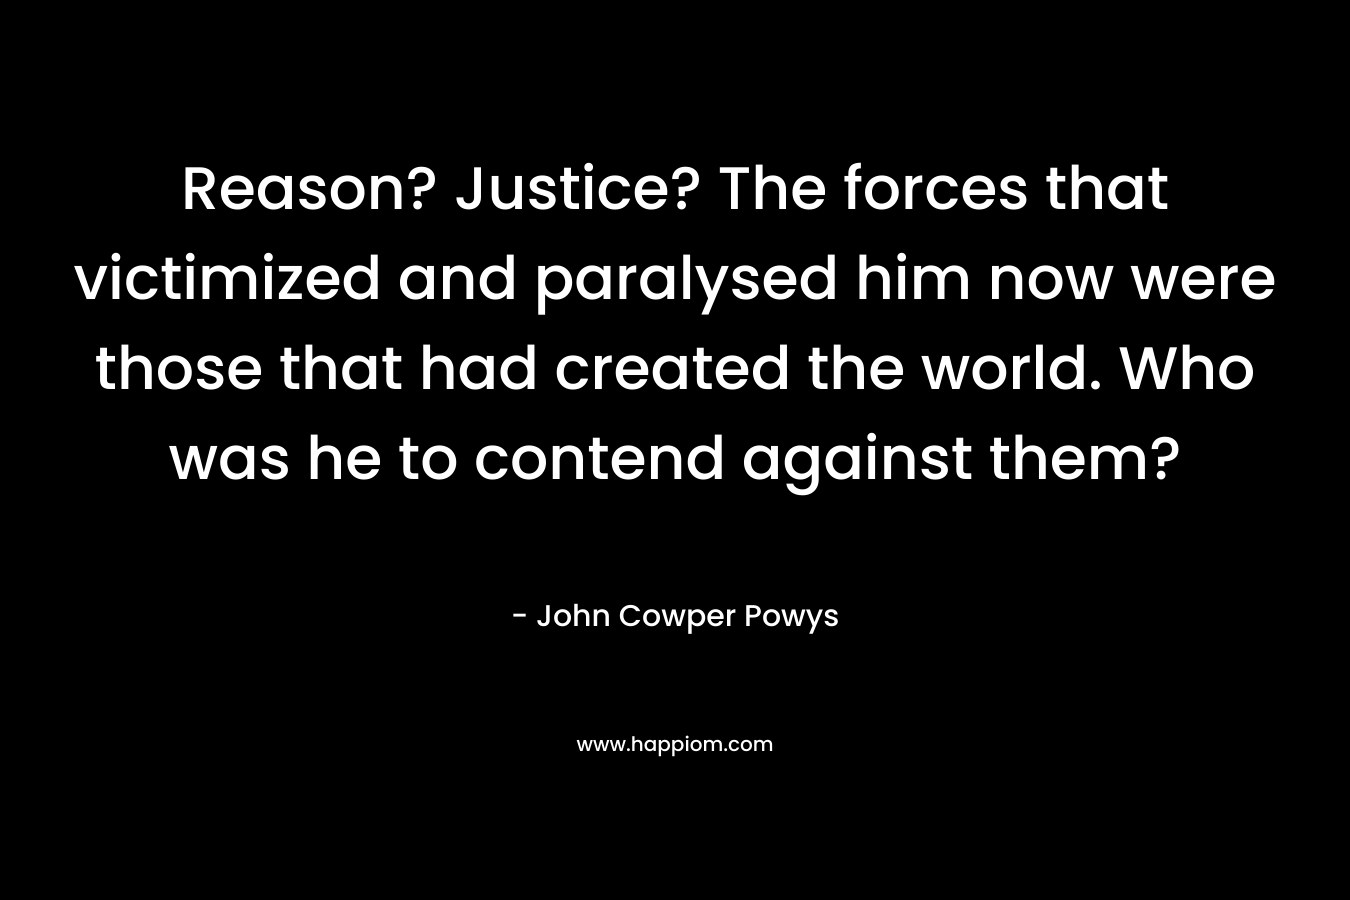 Reason? Justice? The forces that victimized and paralysed him now were those that had created the world. Who was he to contend against them? – John Cowper Powys